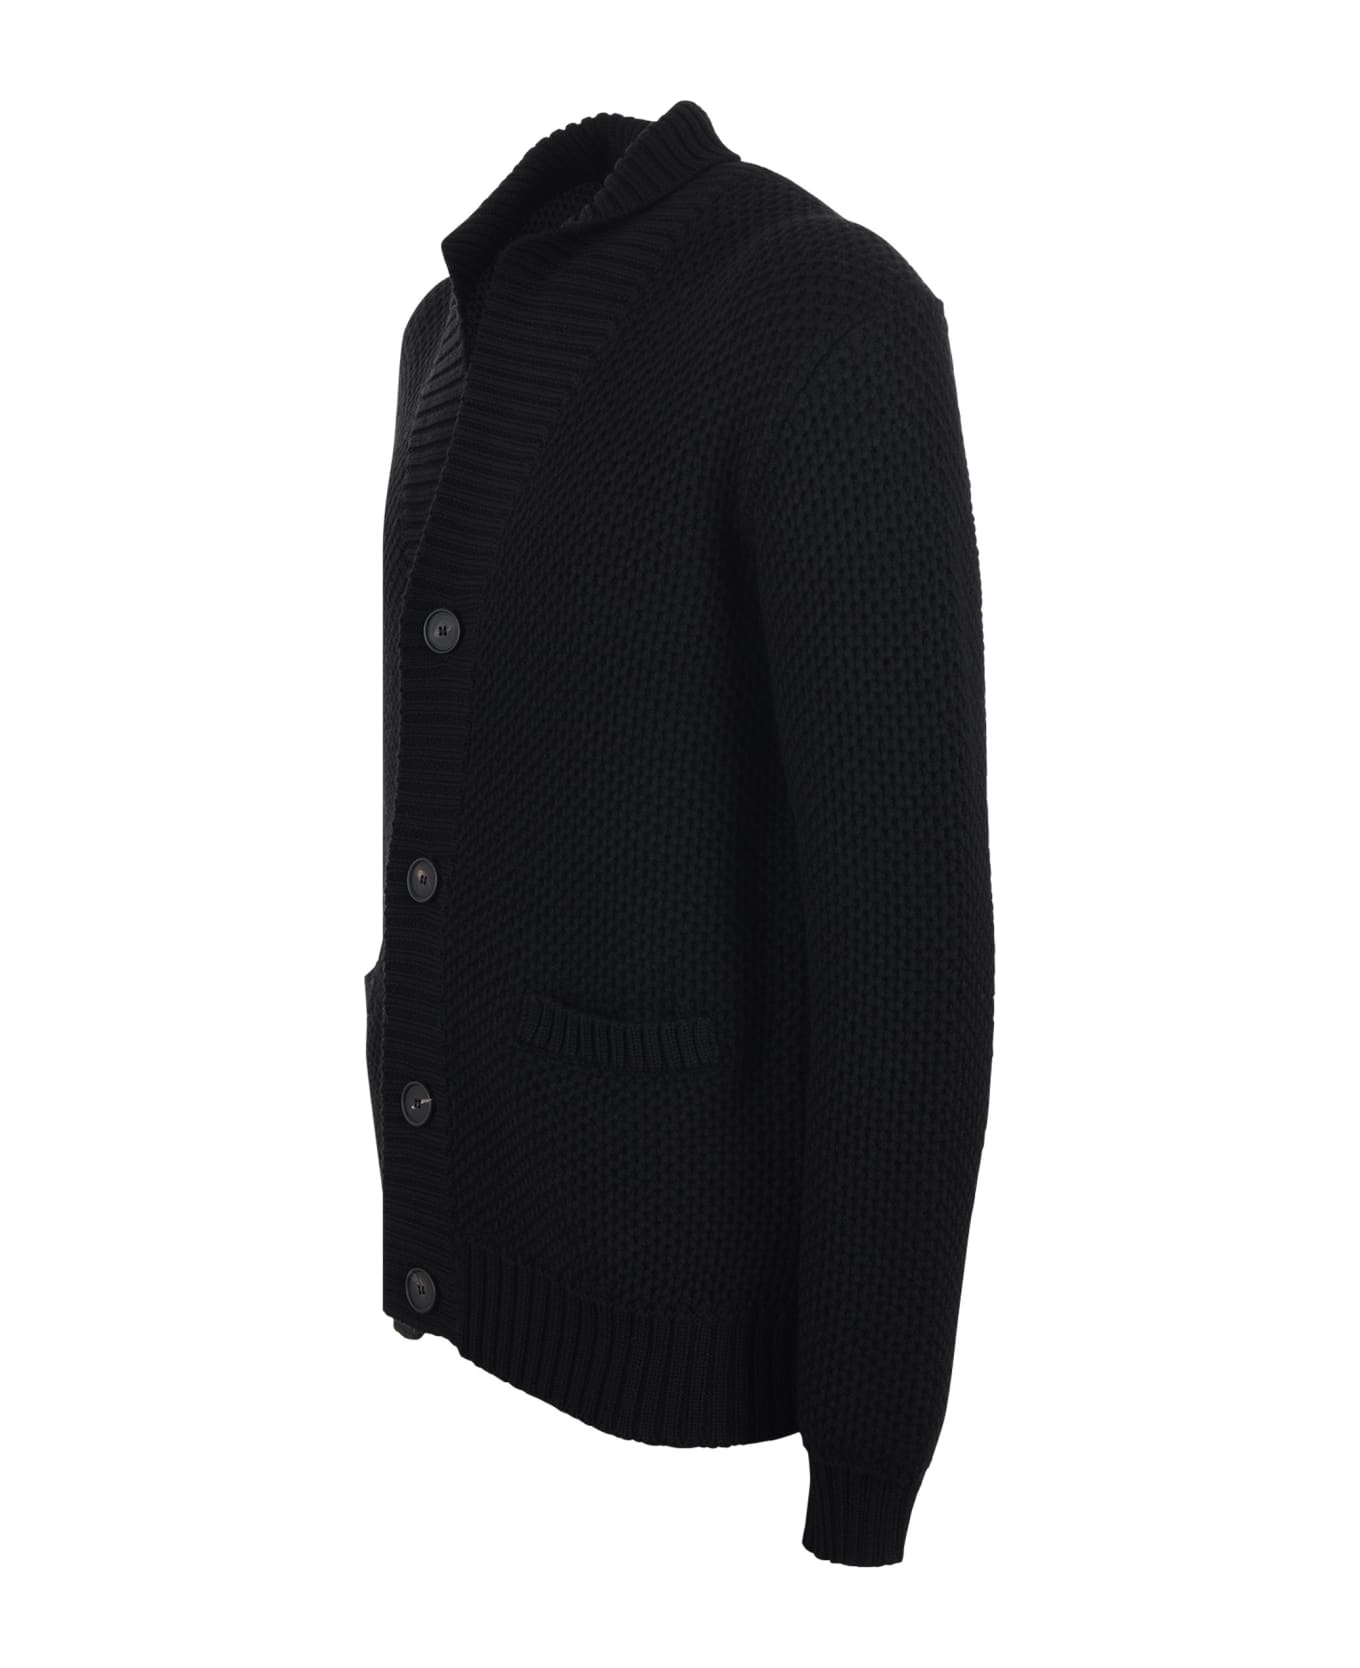 Tagliatore Knitted Buttoned Cardigan - Nero ニットウェア